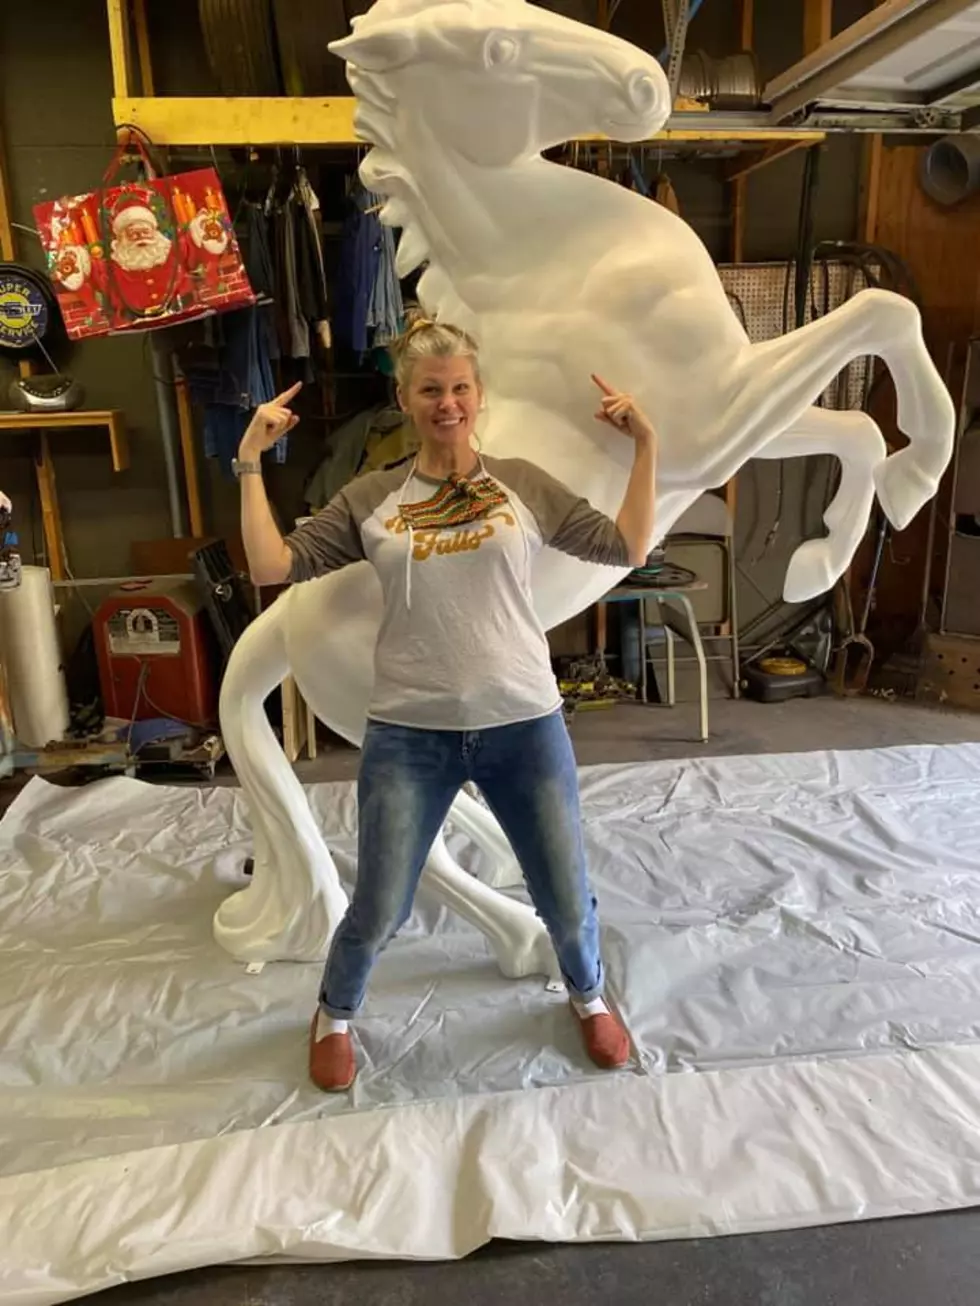 Watch One of the Wichita Falls Mustangs Get Painted 